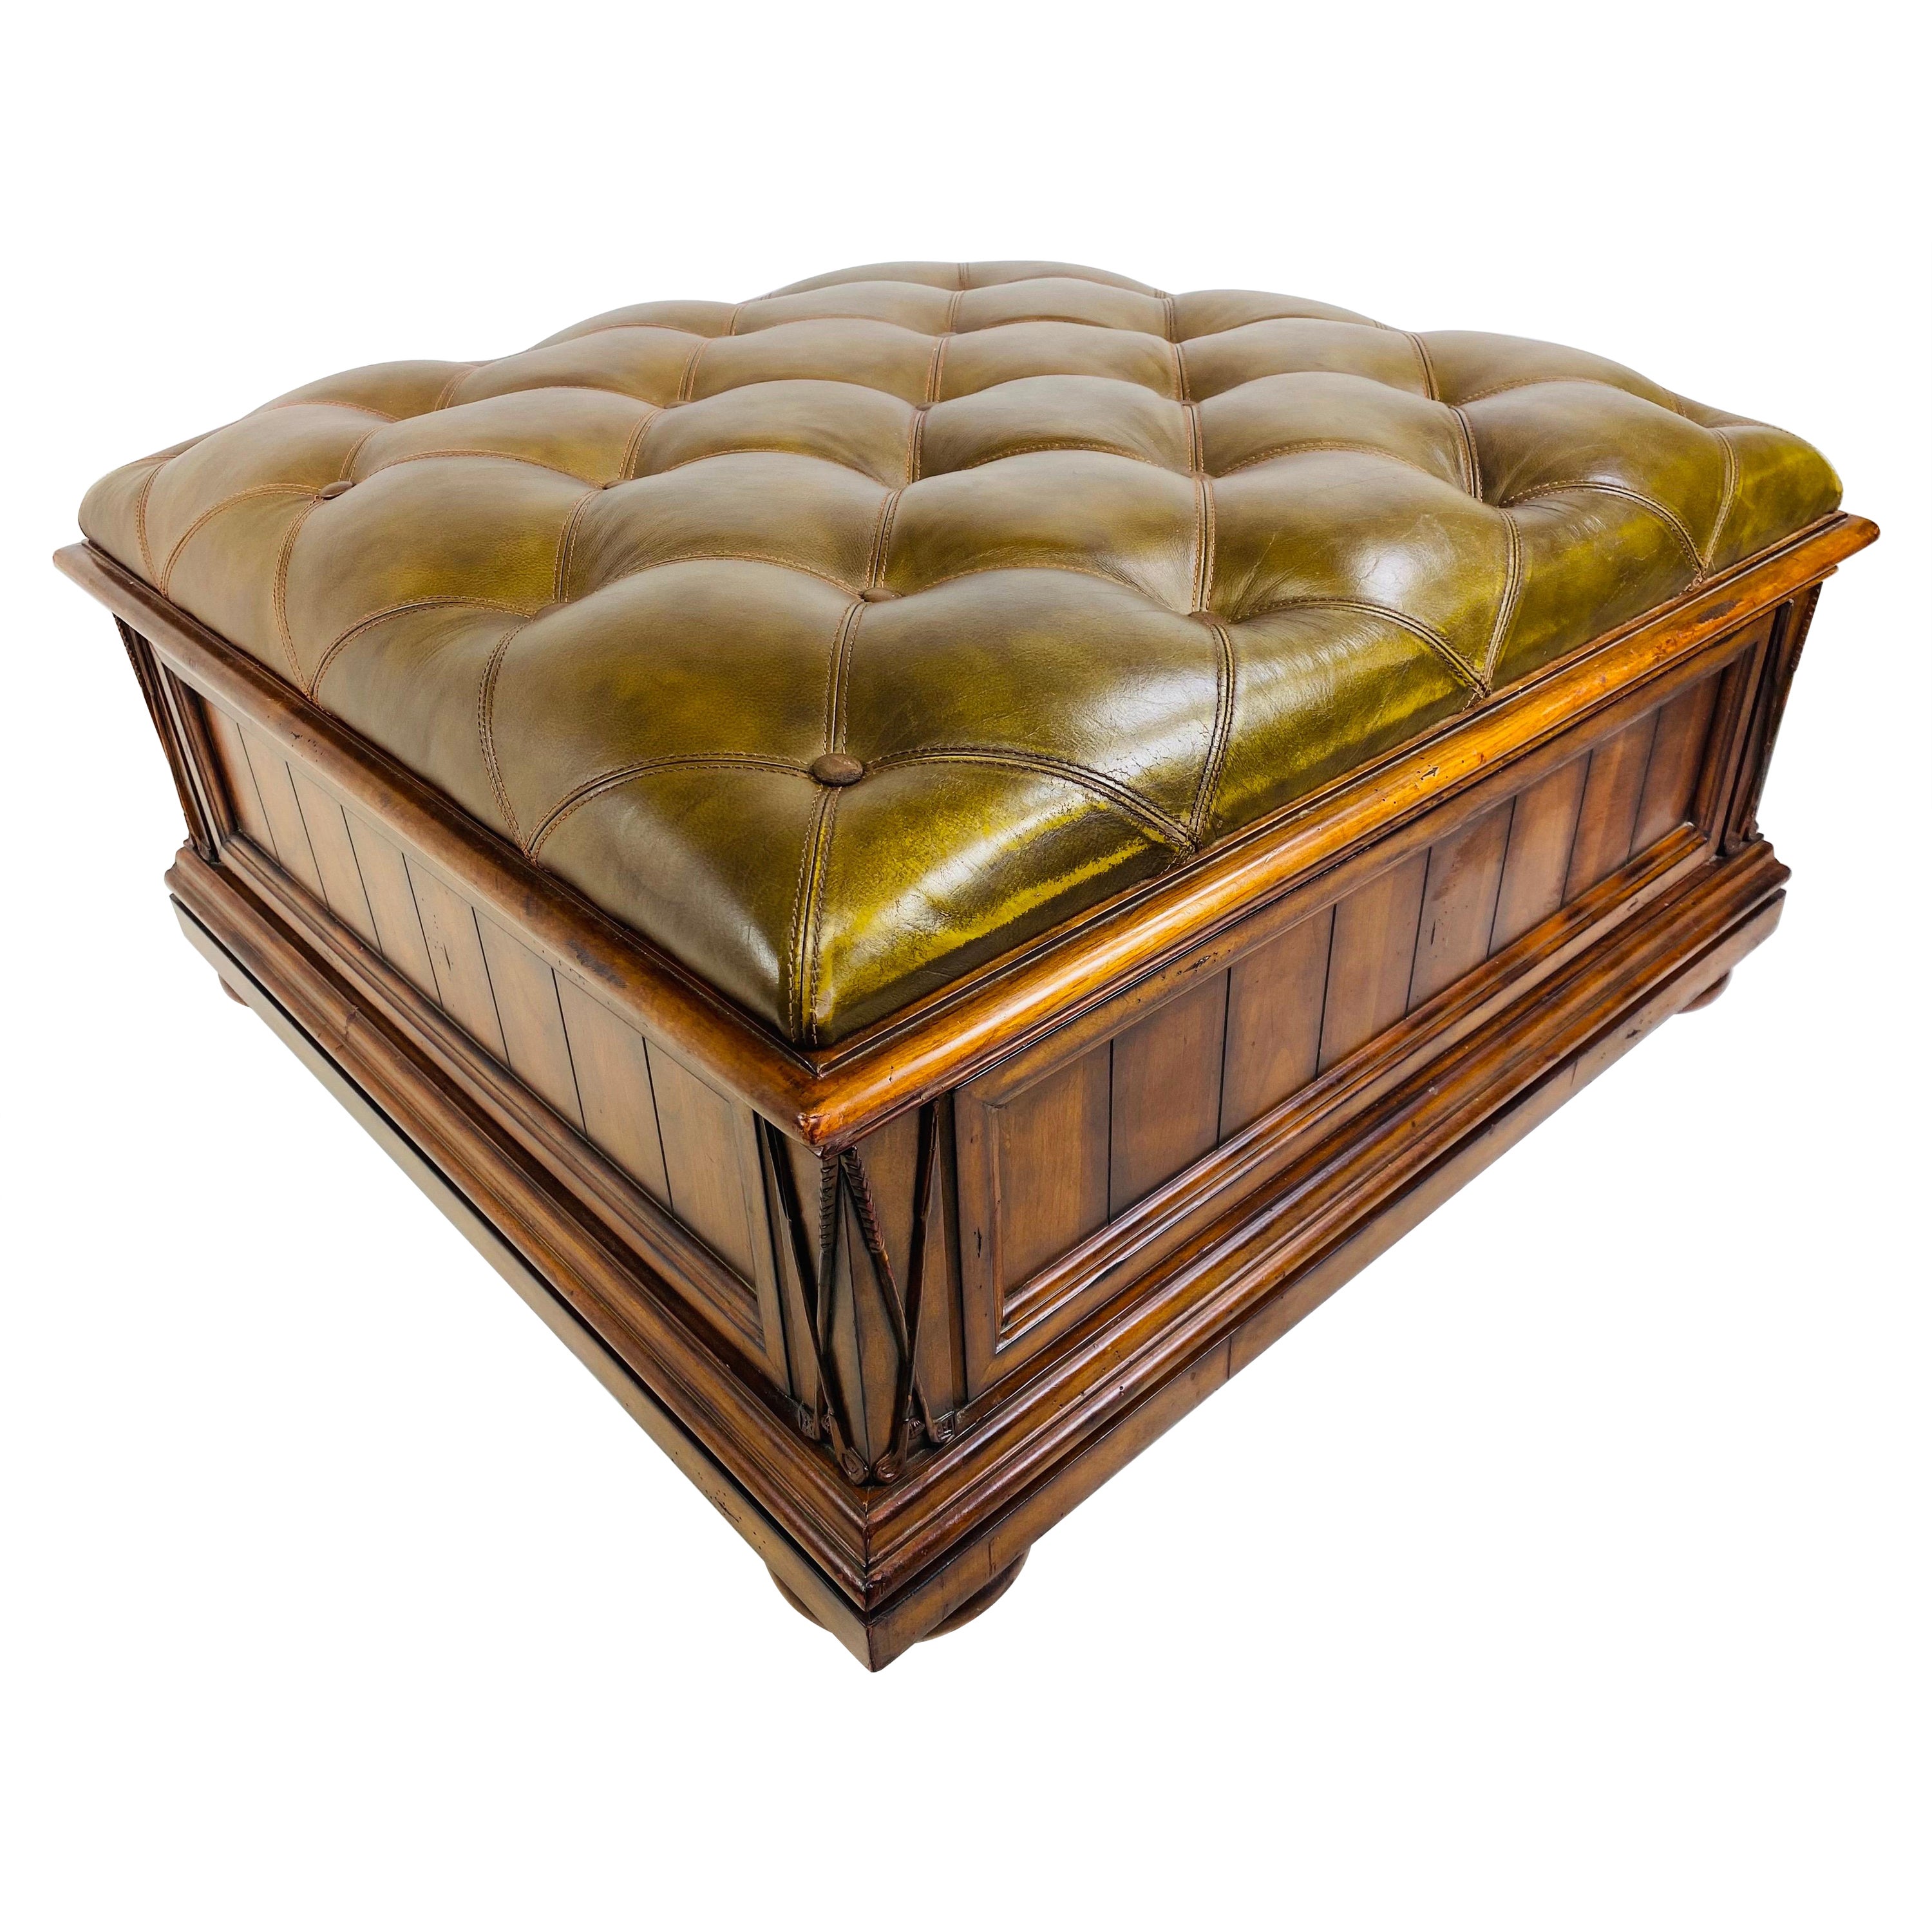 Handsome oversized tufted leather ottoman/trunk after Ralph Lauren